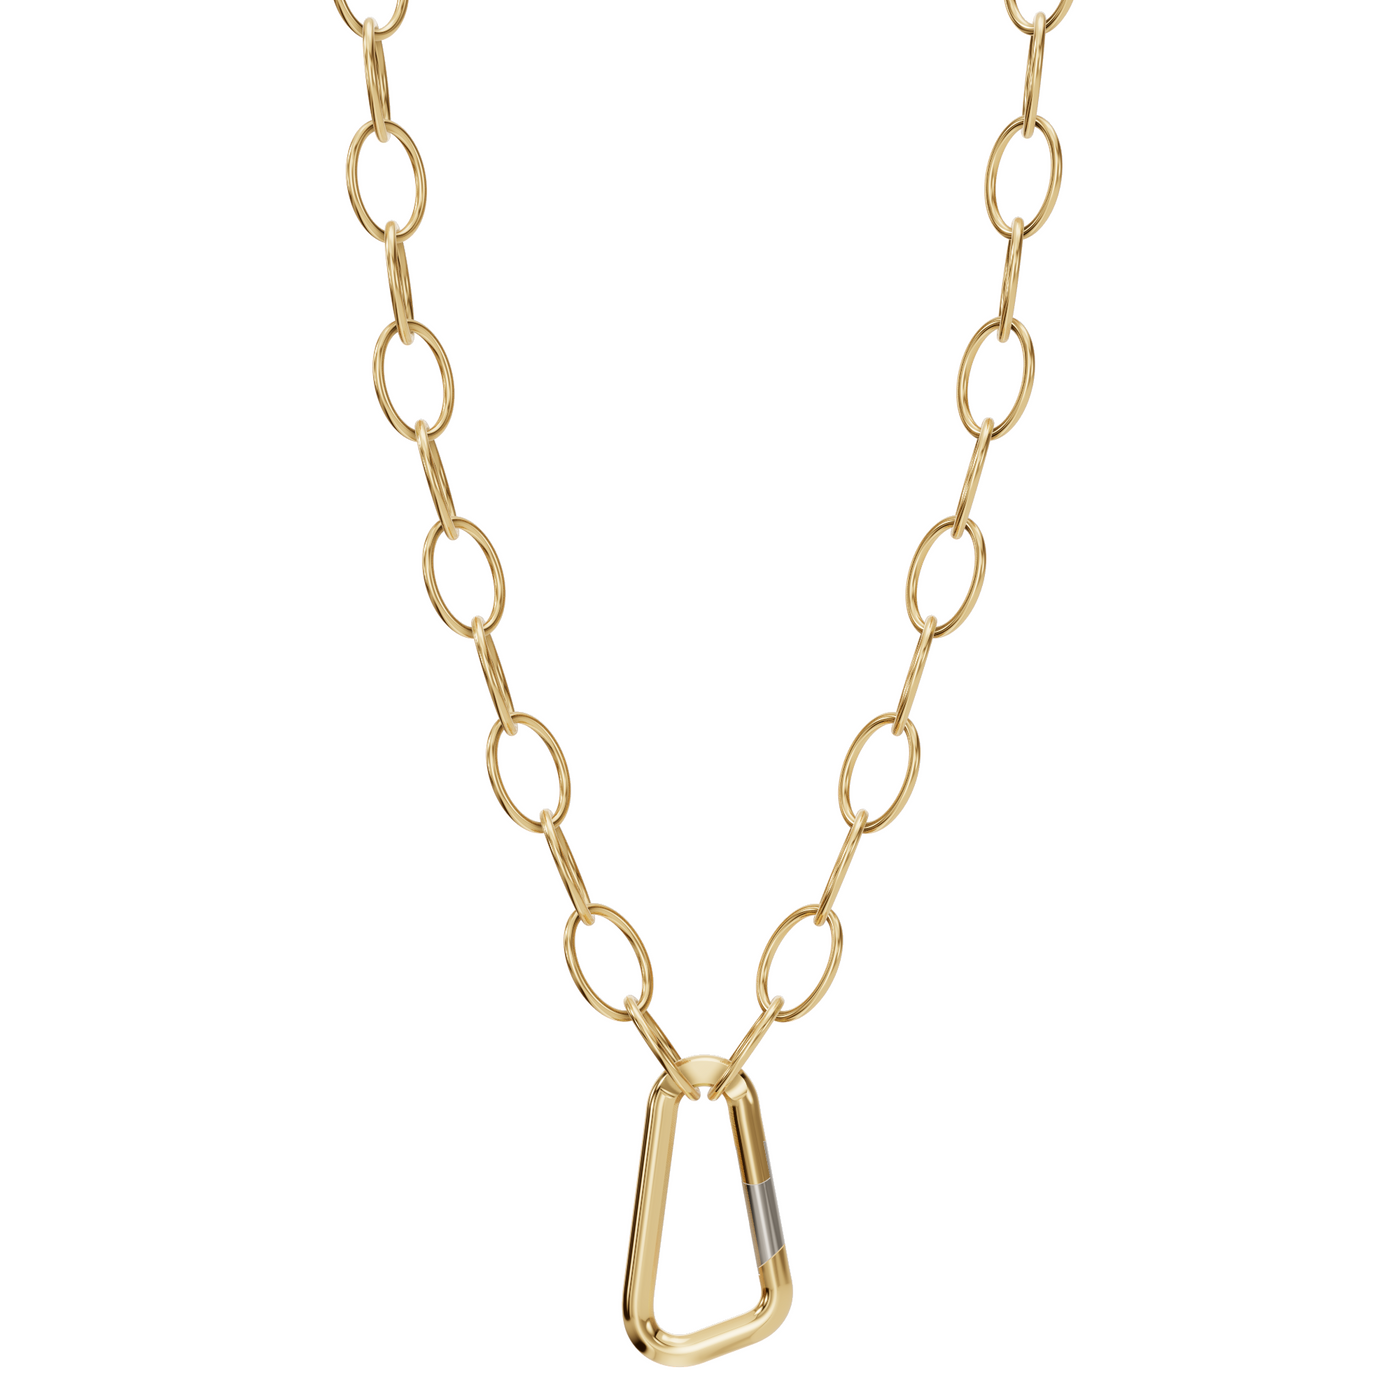 6.3mm Solid 14k Gold Hinge Chain